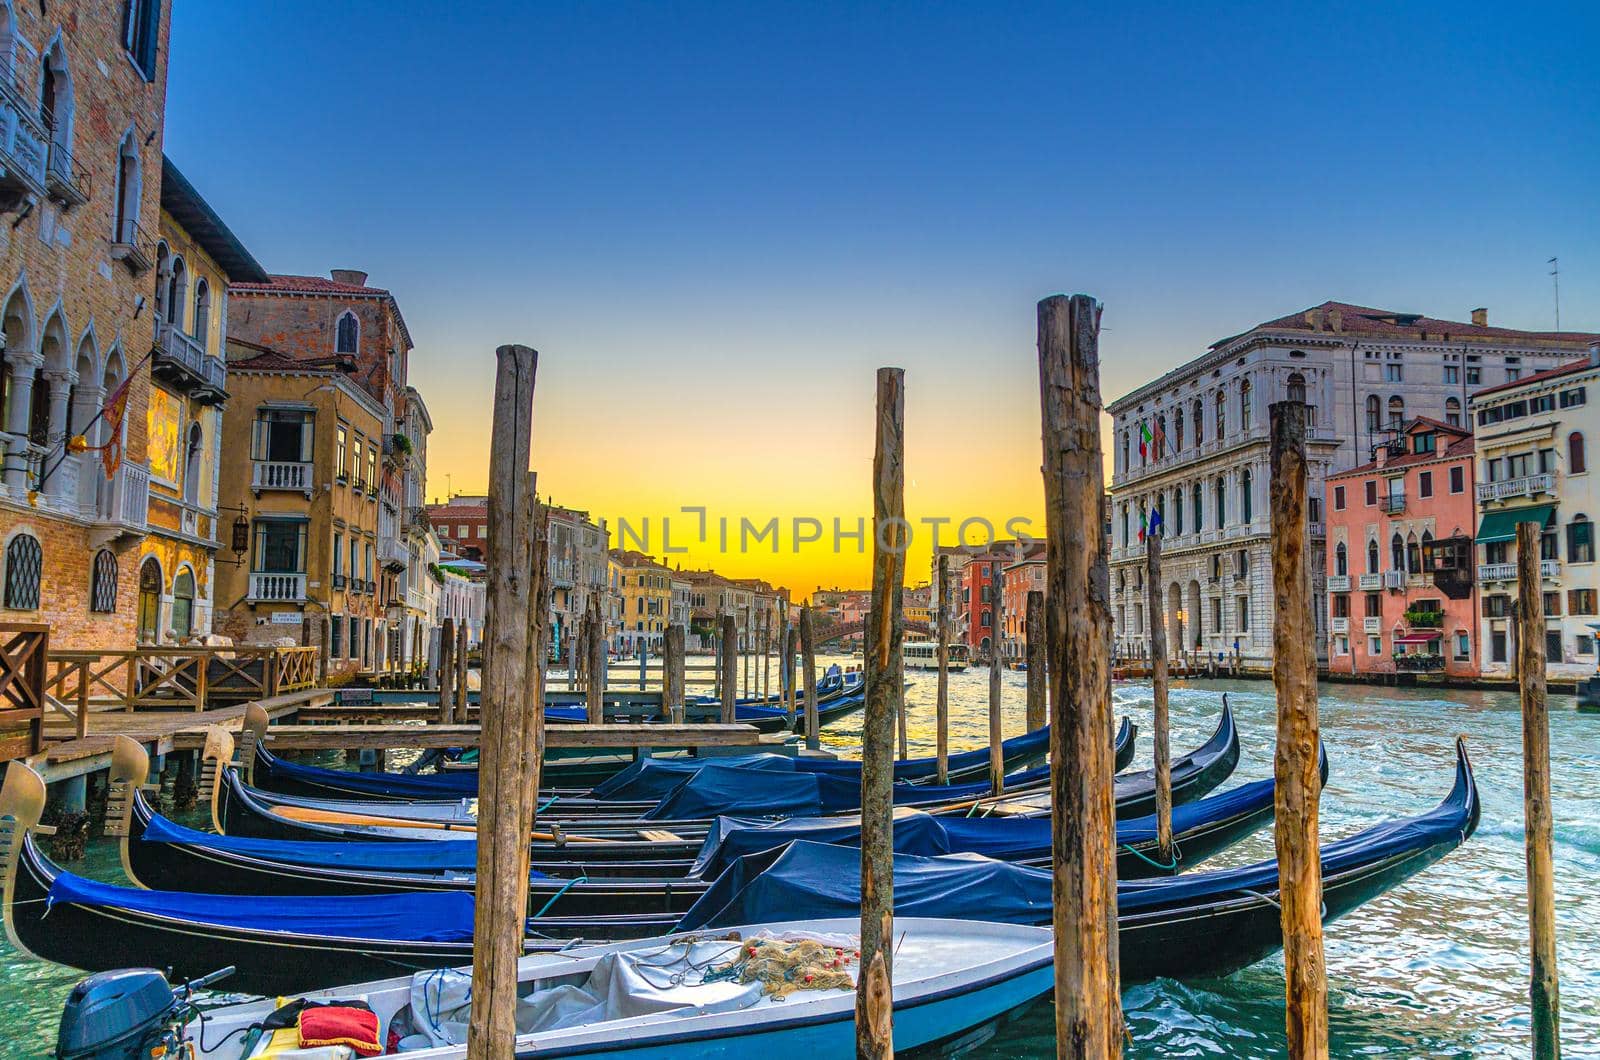 Gondolas moored docked on pier of Grand Canal waterway in Venice. Wooden poles and baroque style buildings along Canal Grande. Amazing Venice cityscape at sunset twilight. Veneto Region, Italy